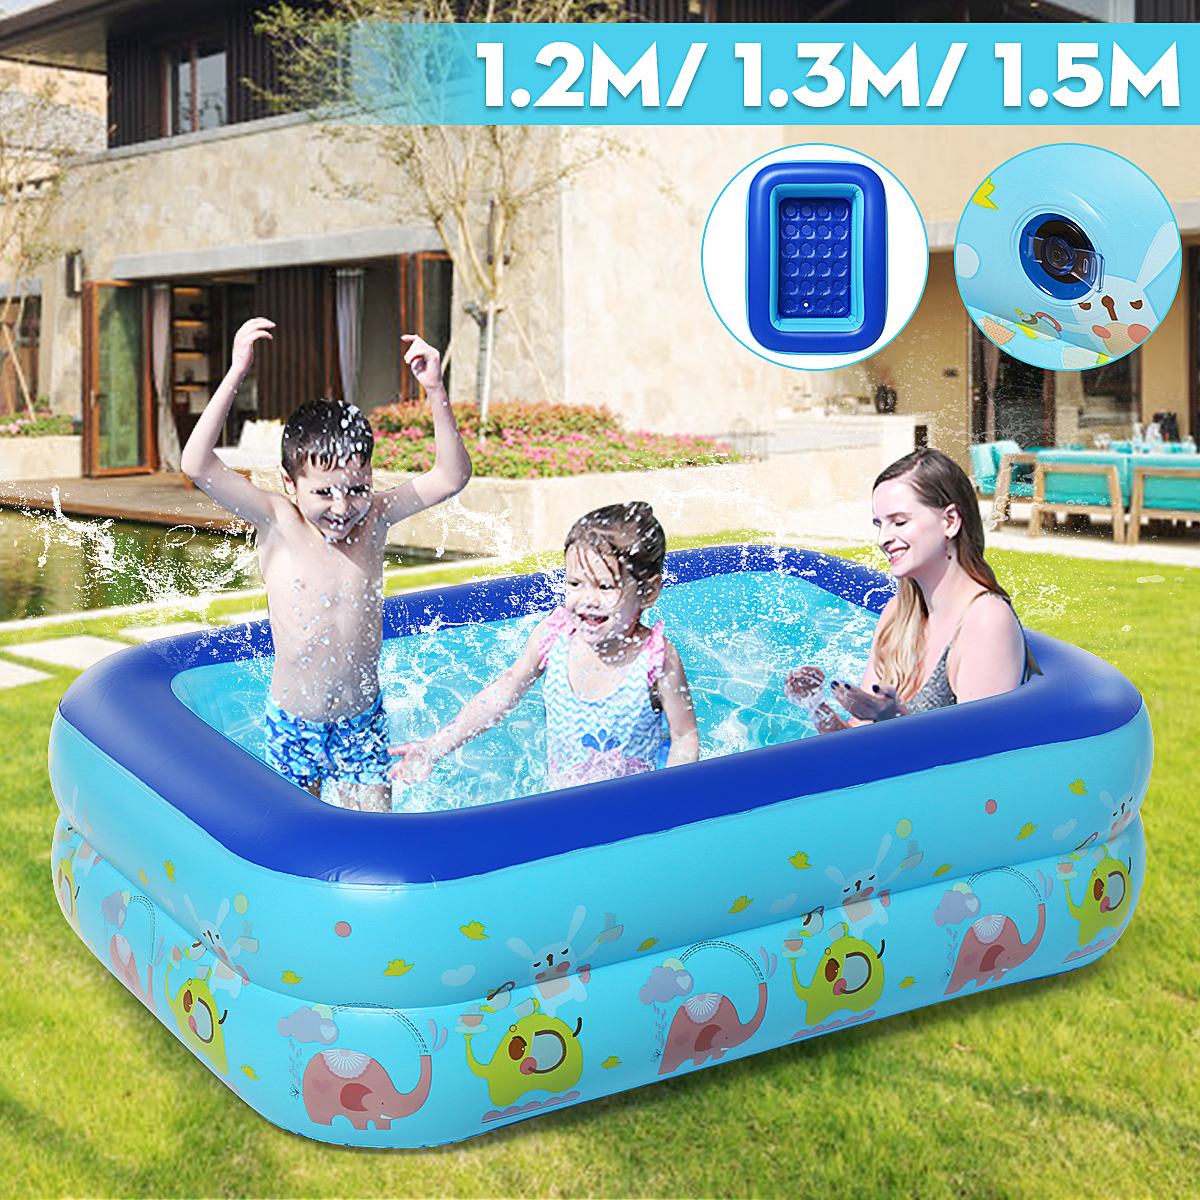 120130150CM-Inflatable-Swimming-Pool-Kids-Adult-Summer-Bathtub-PVC-Family-Water-Toy-1813651-1